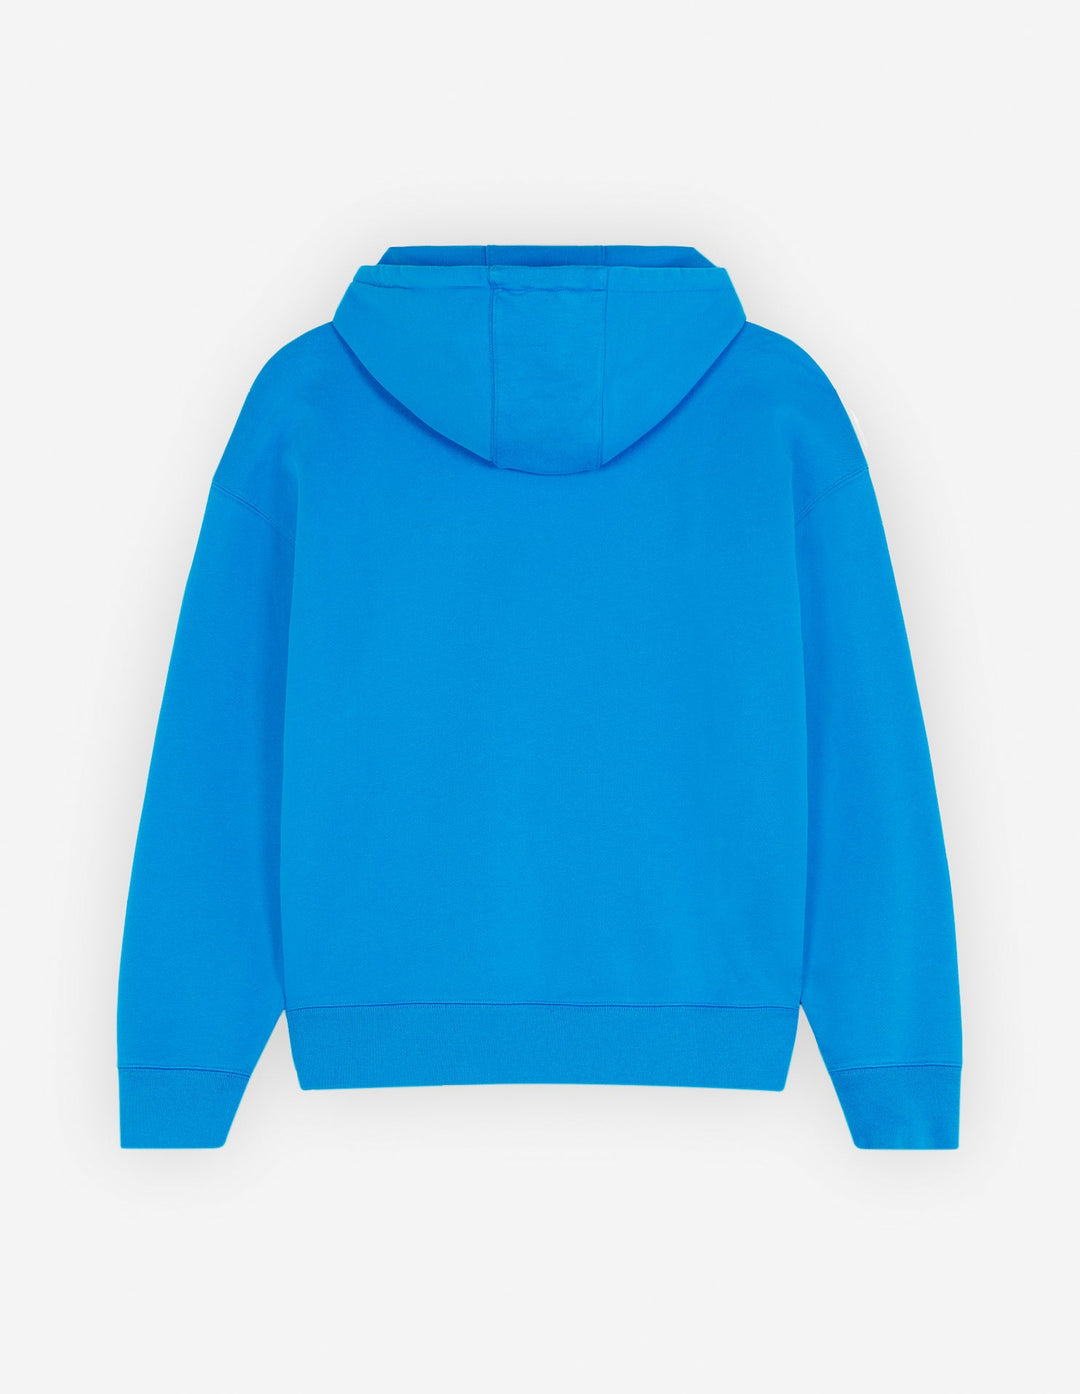 GO FASTER OVERSIZE HOODIE